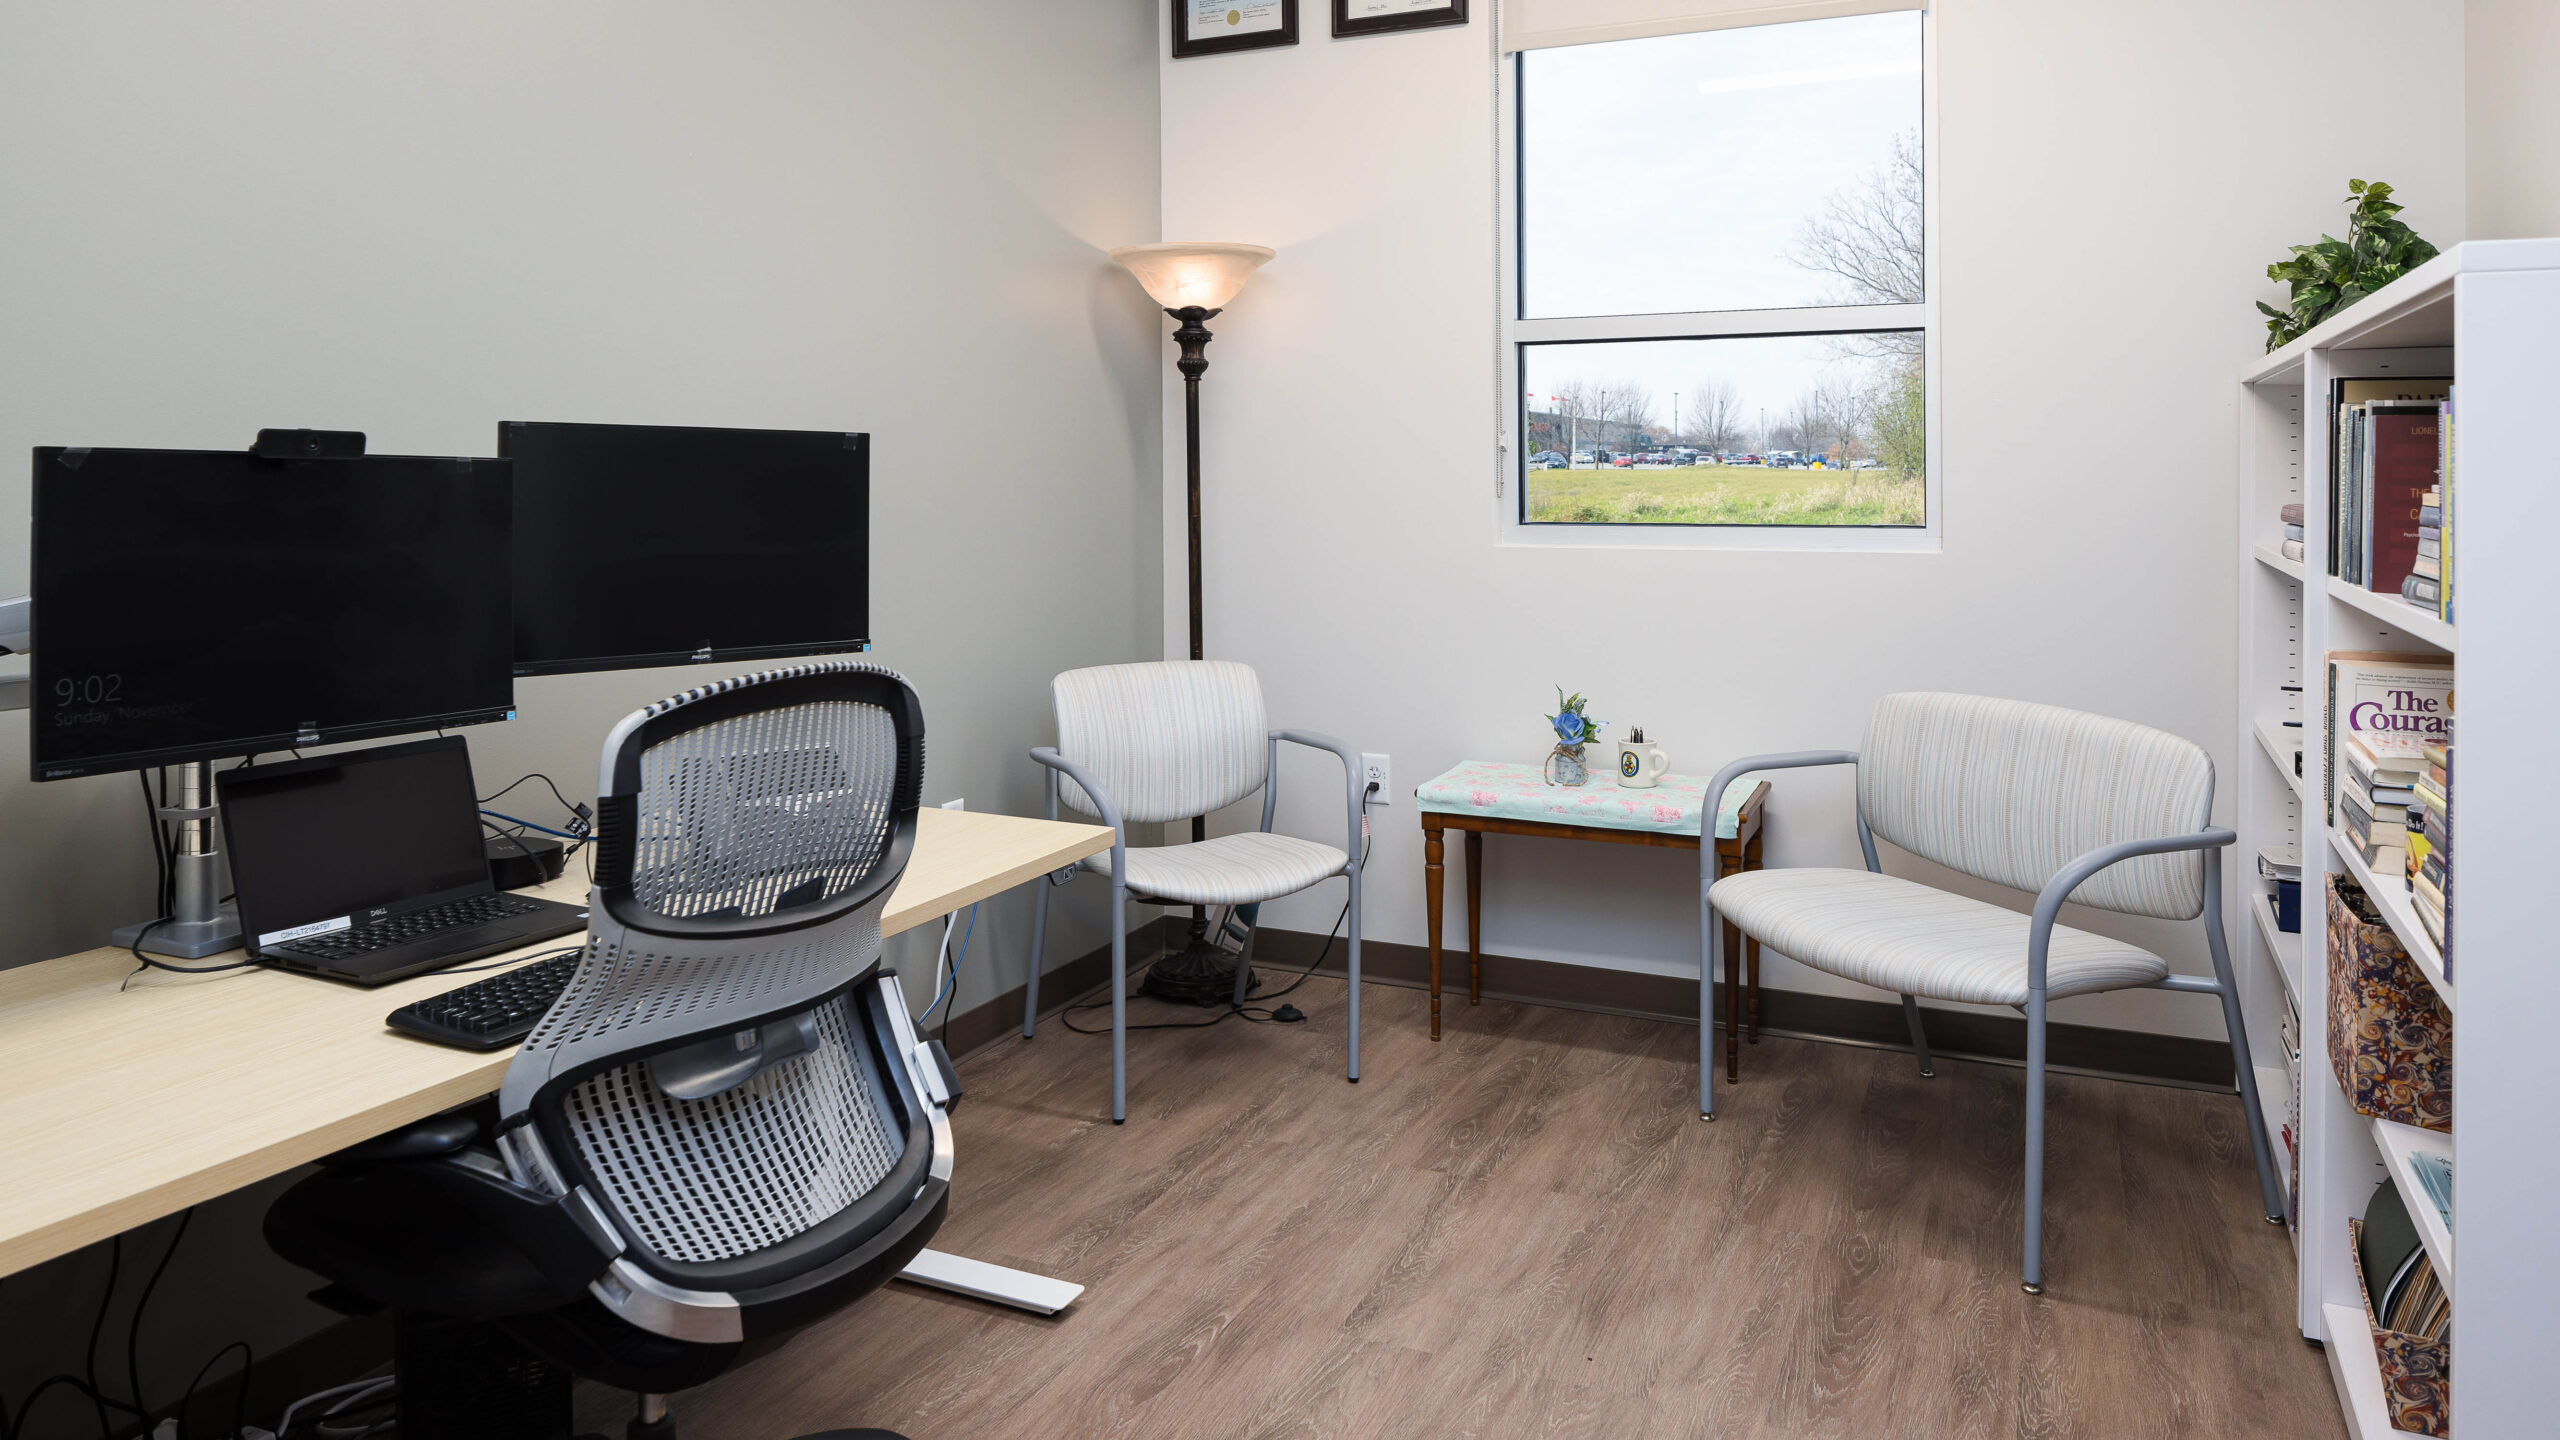 Patient room with desk and chairs